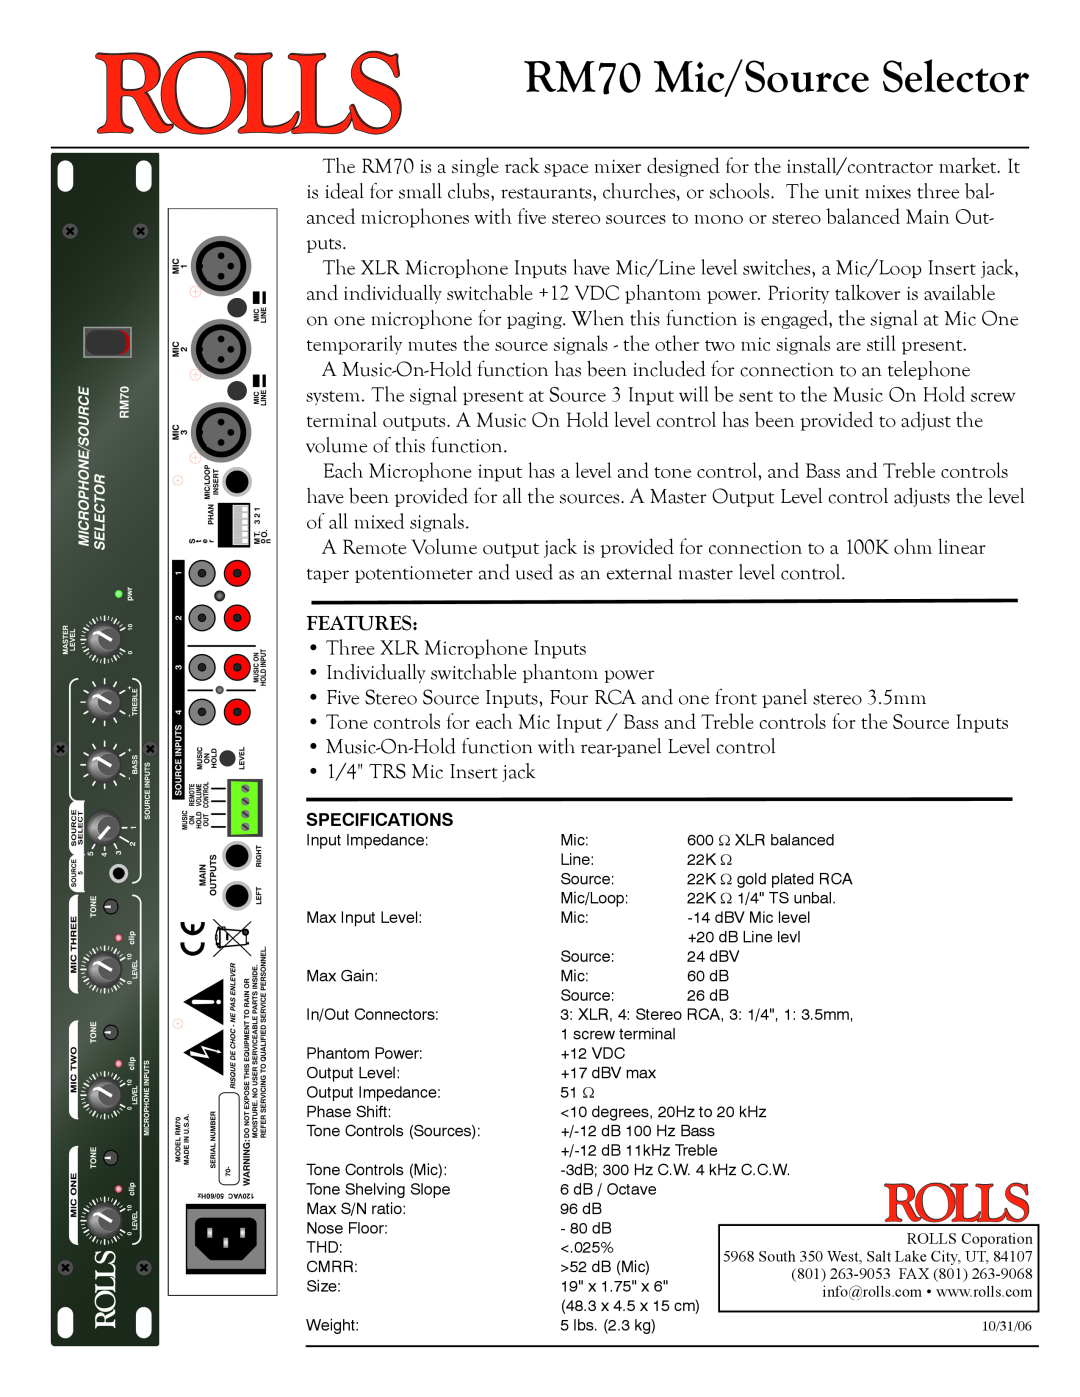 Rolls specifications RM70 Mic/Source Selector, Features 